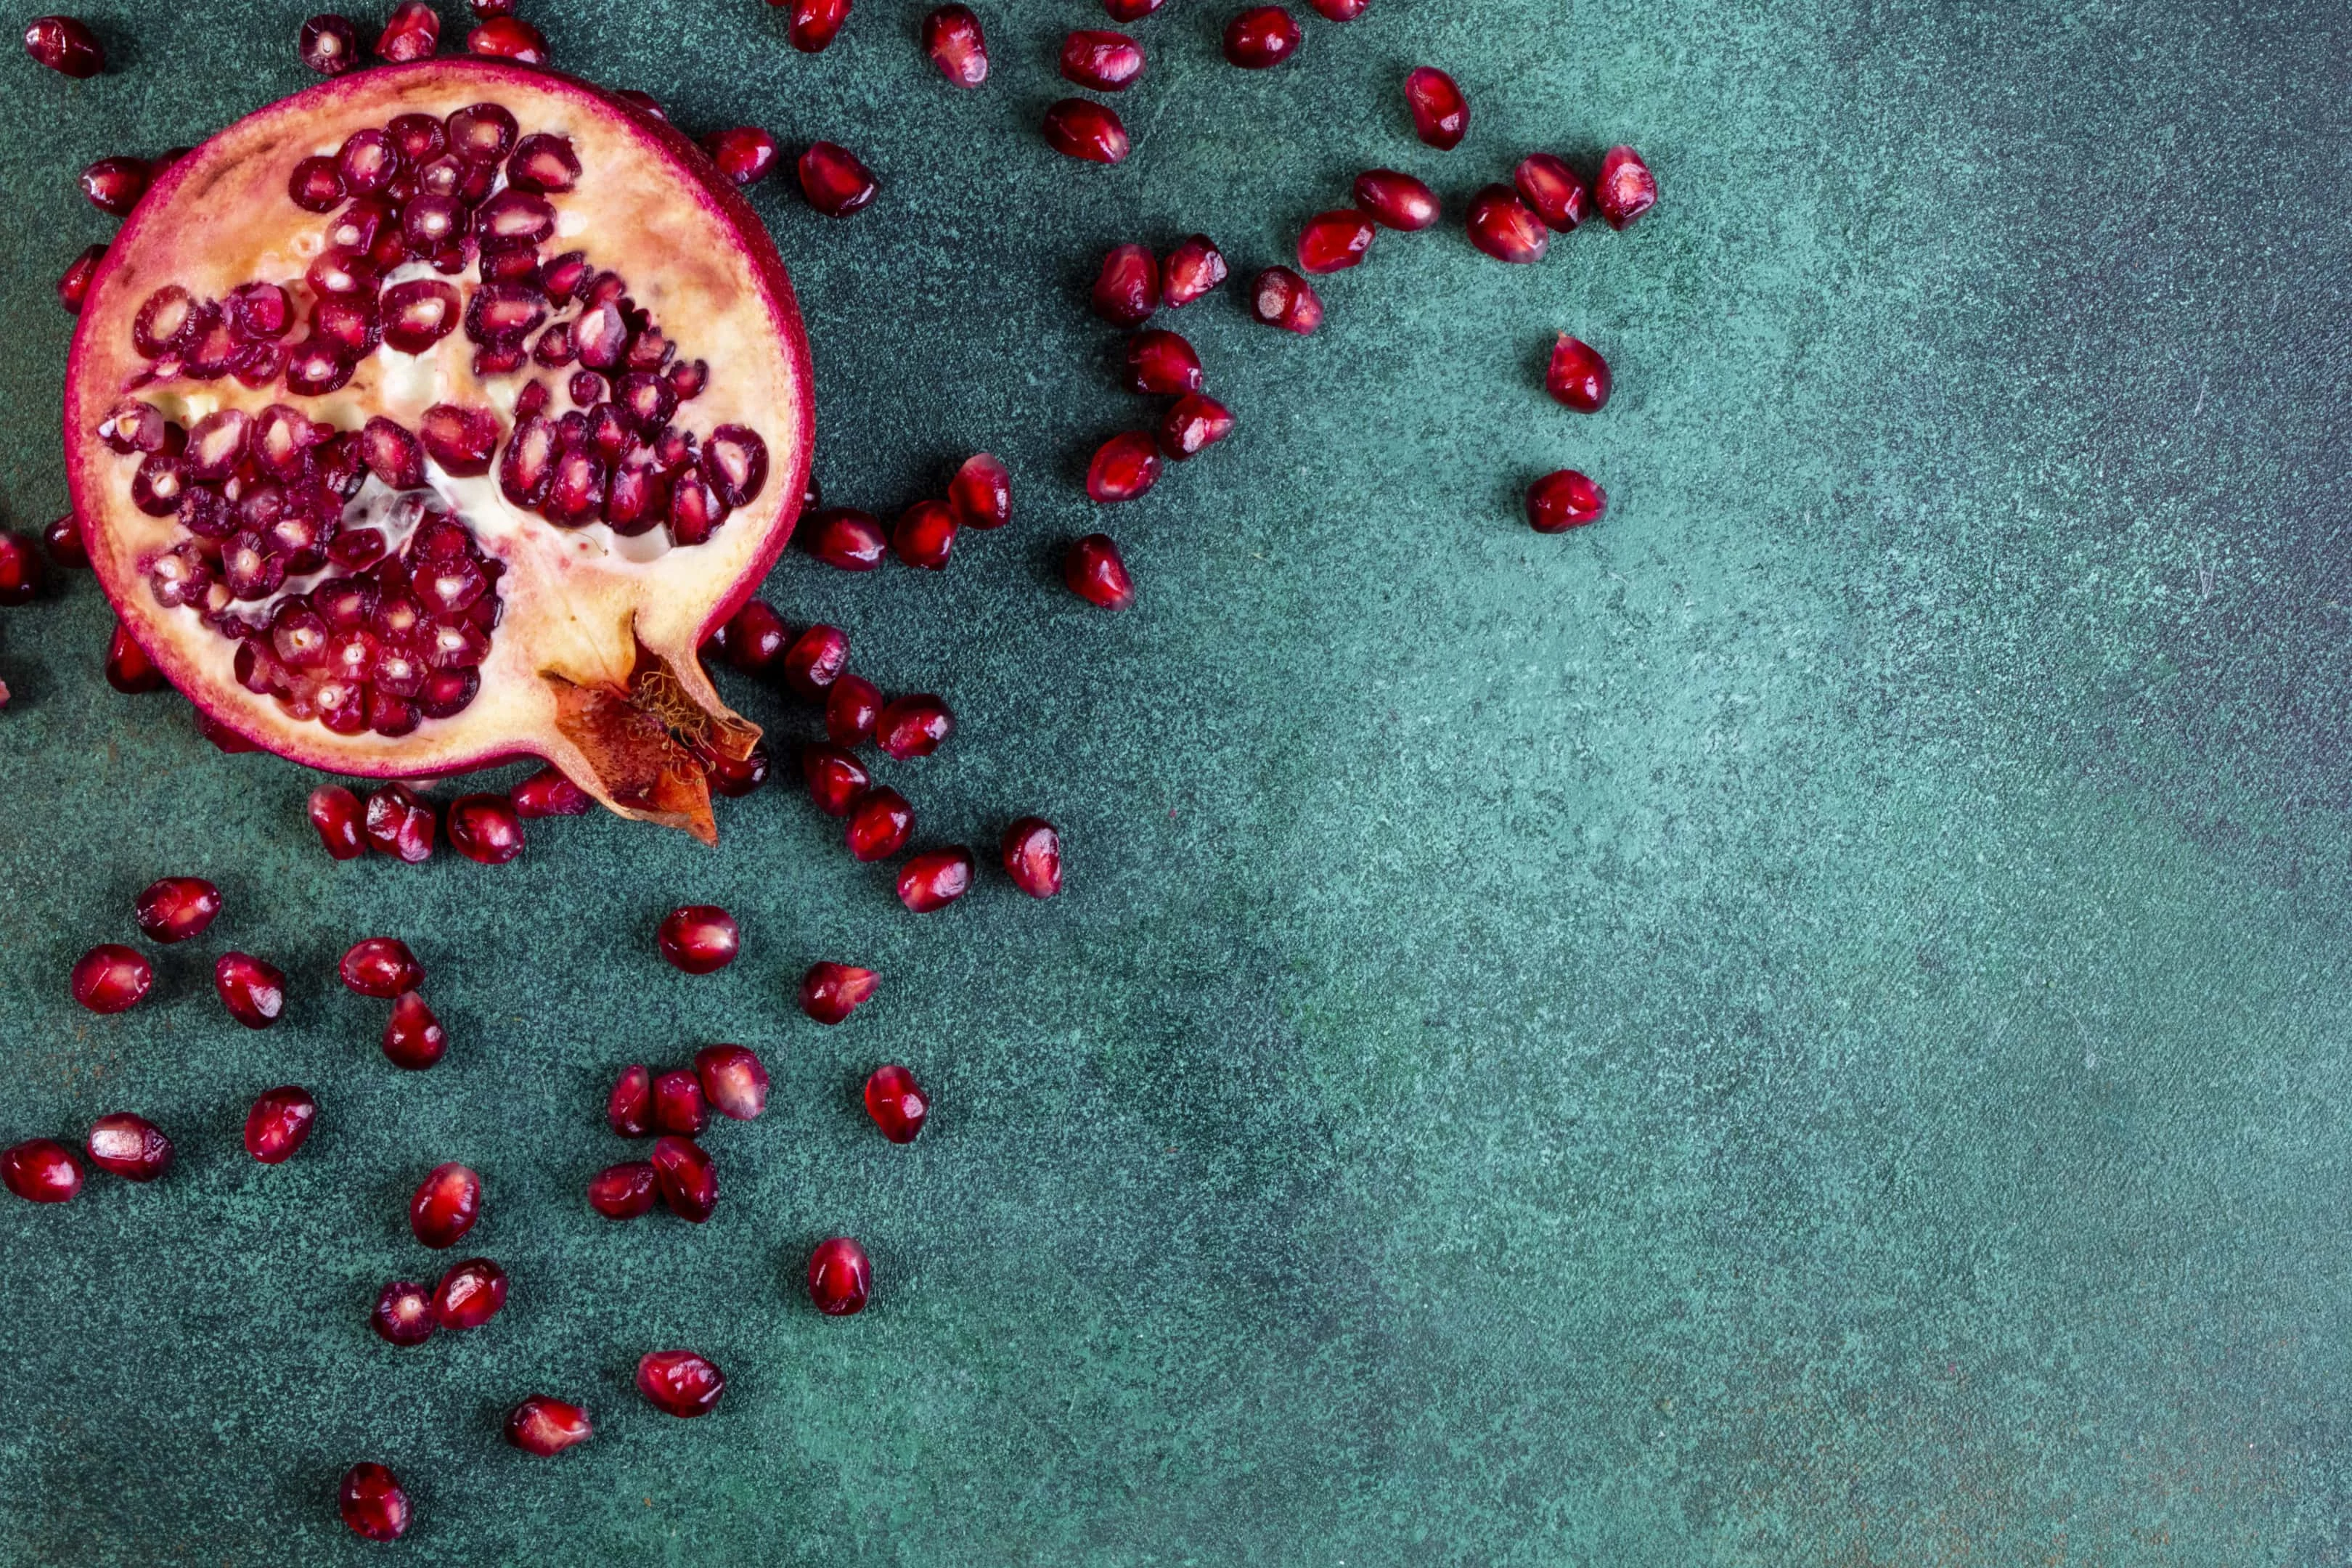 Chopped half of pomegranate on green table